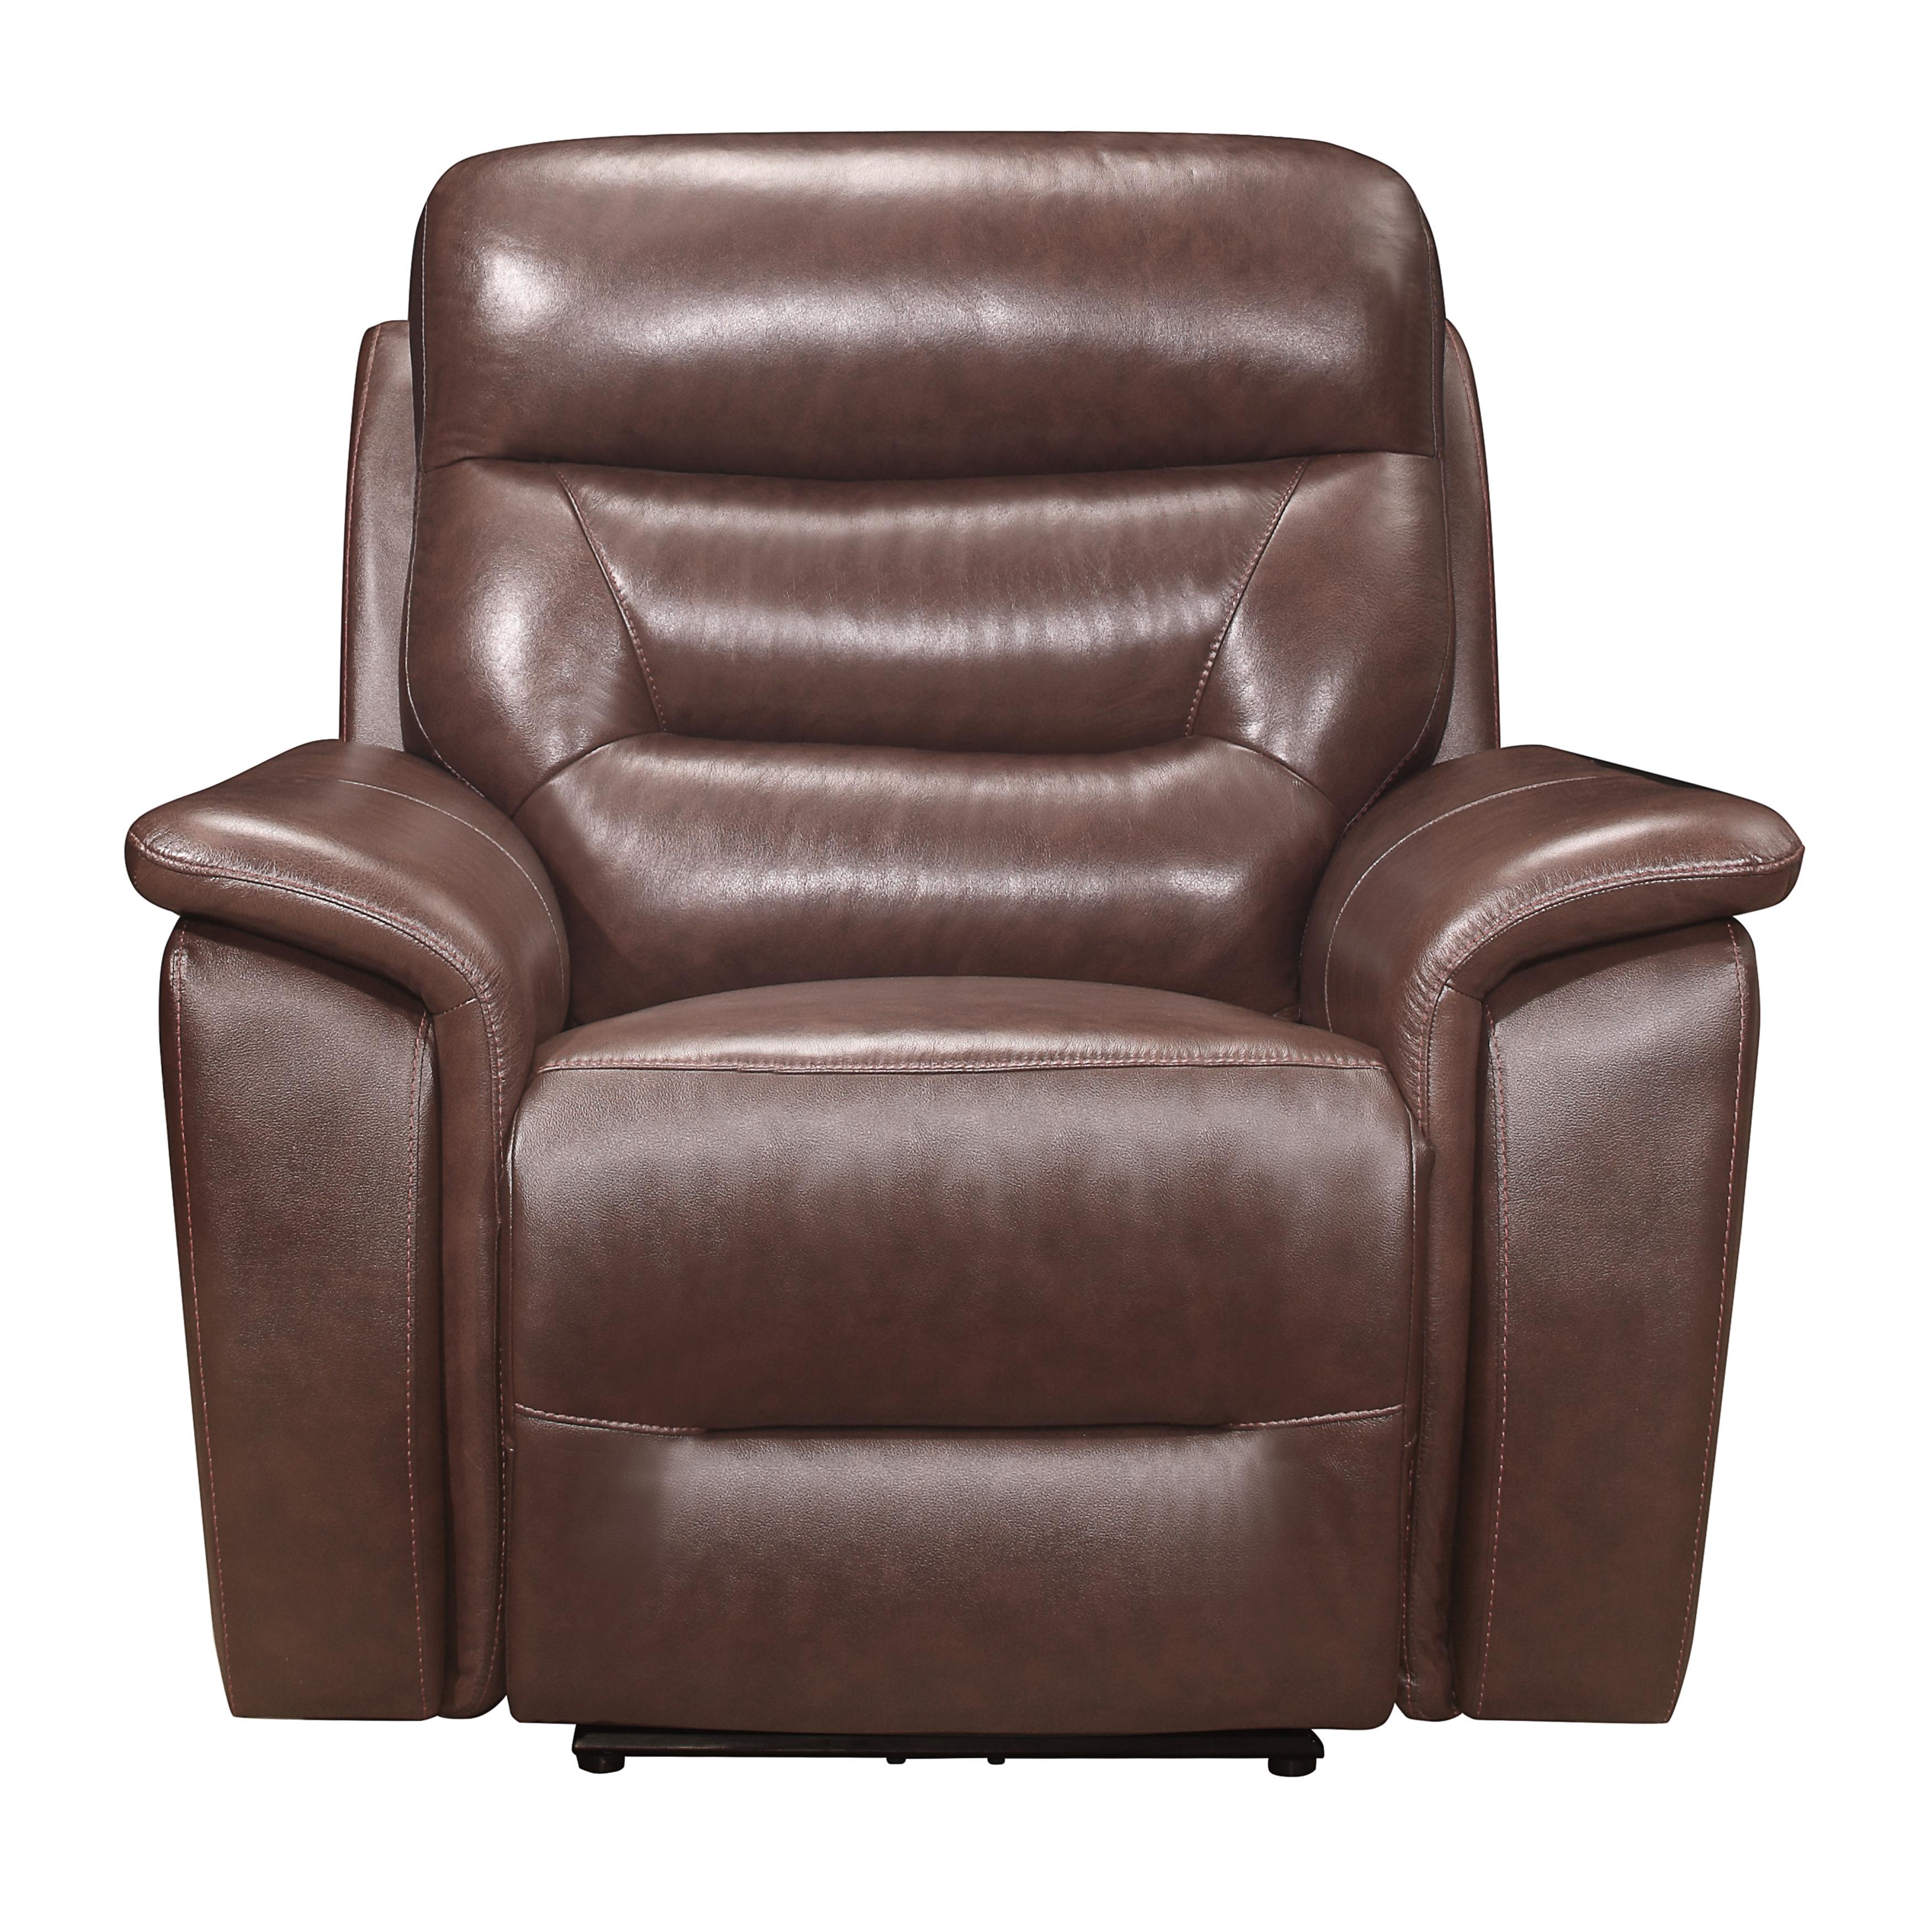 Transitional Power Reclining Chair 9445BR-1PWH Armando 9445BR-1PWH in Brown Leather